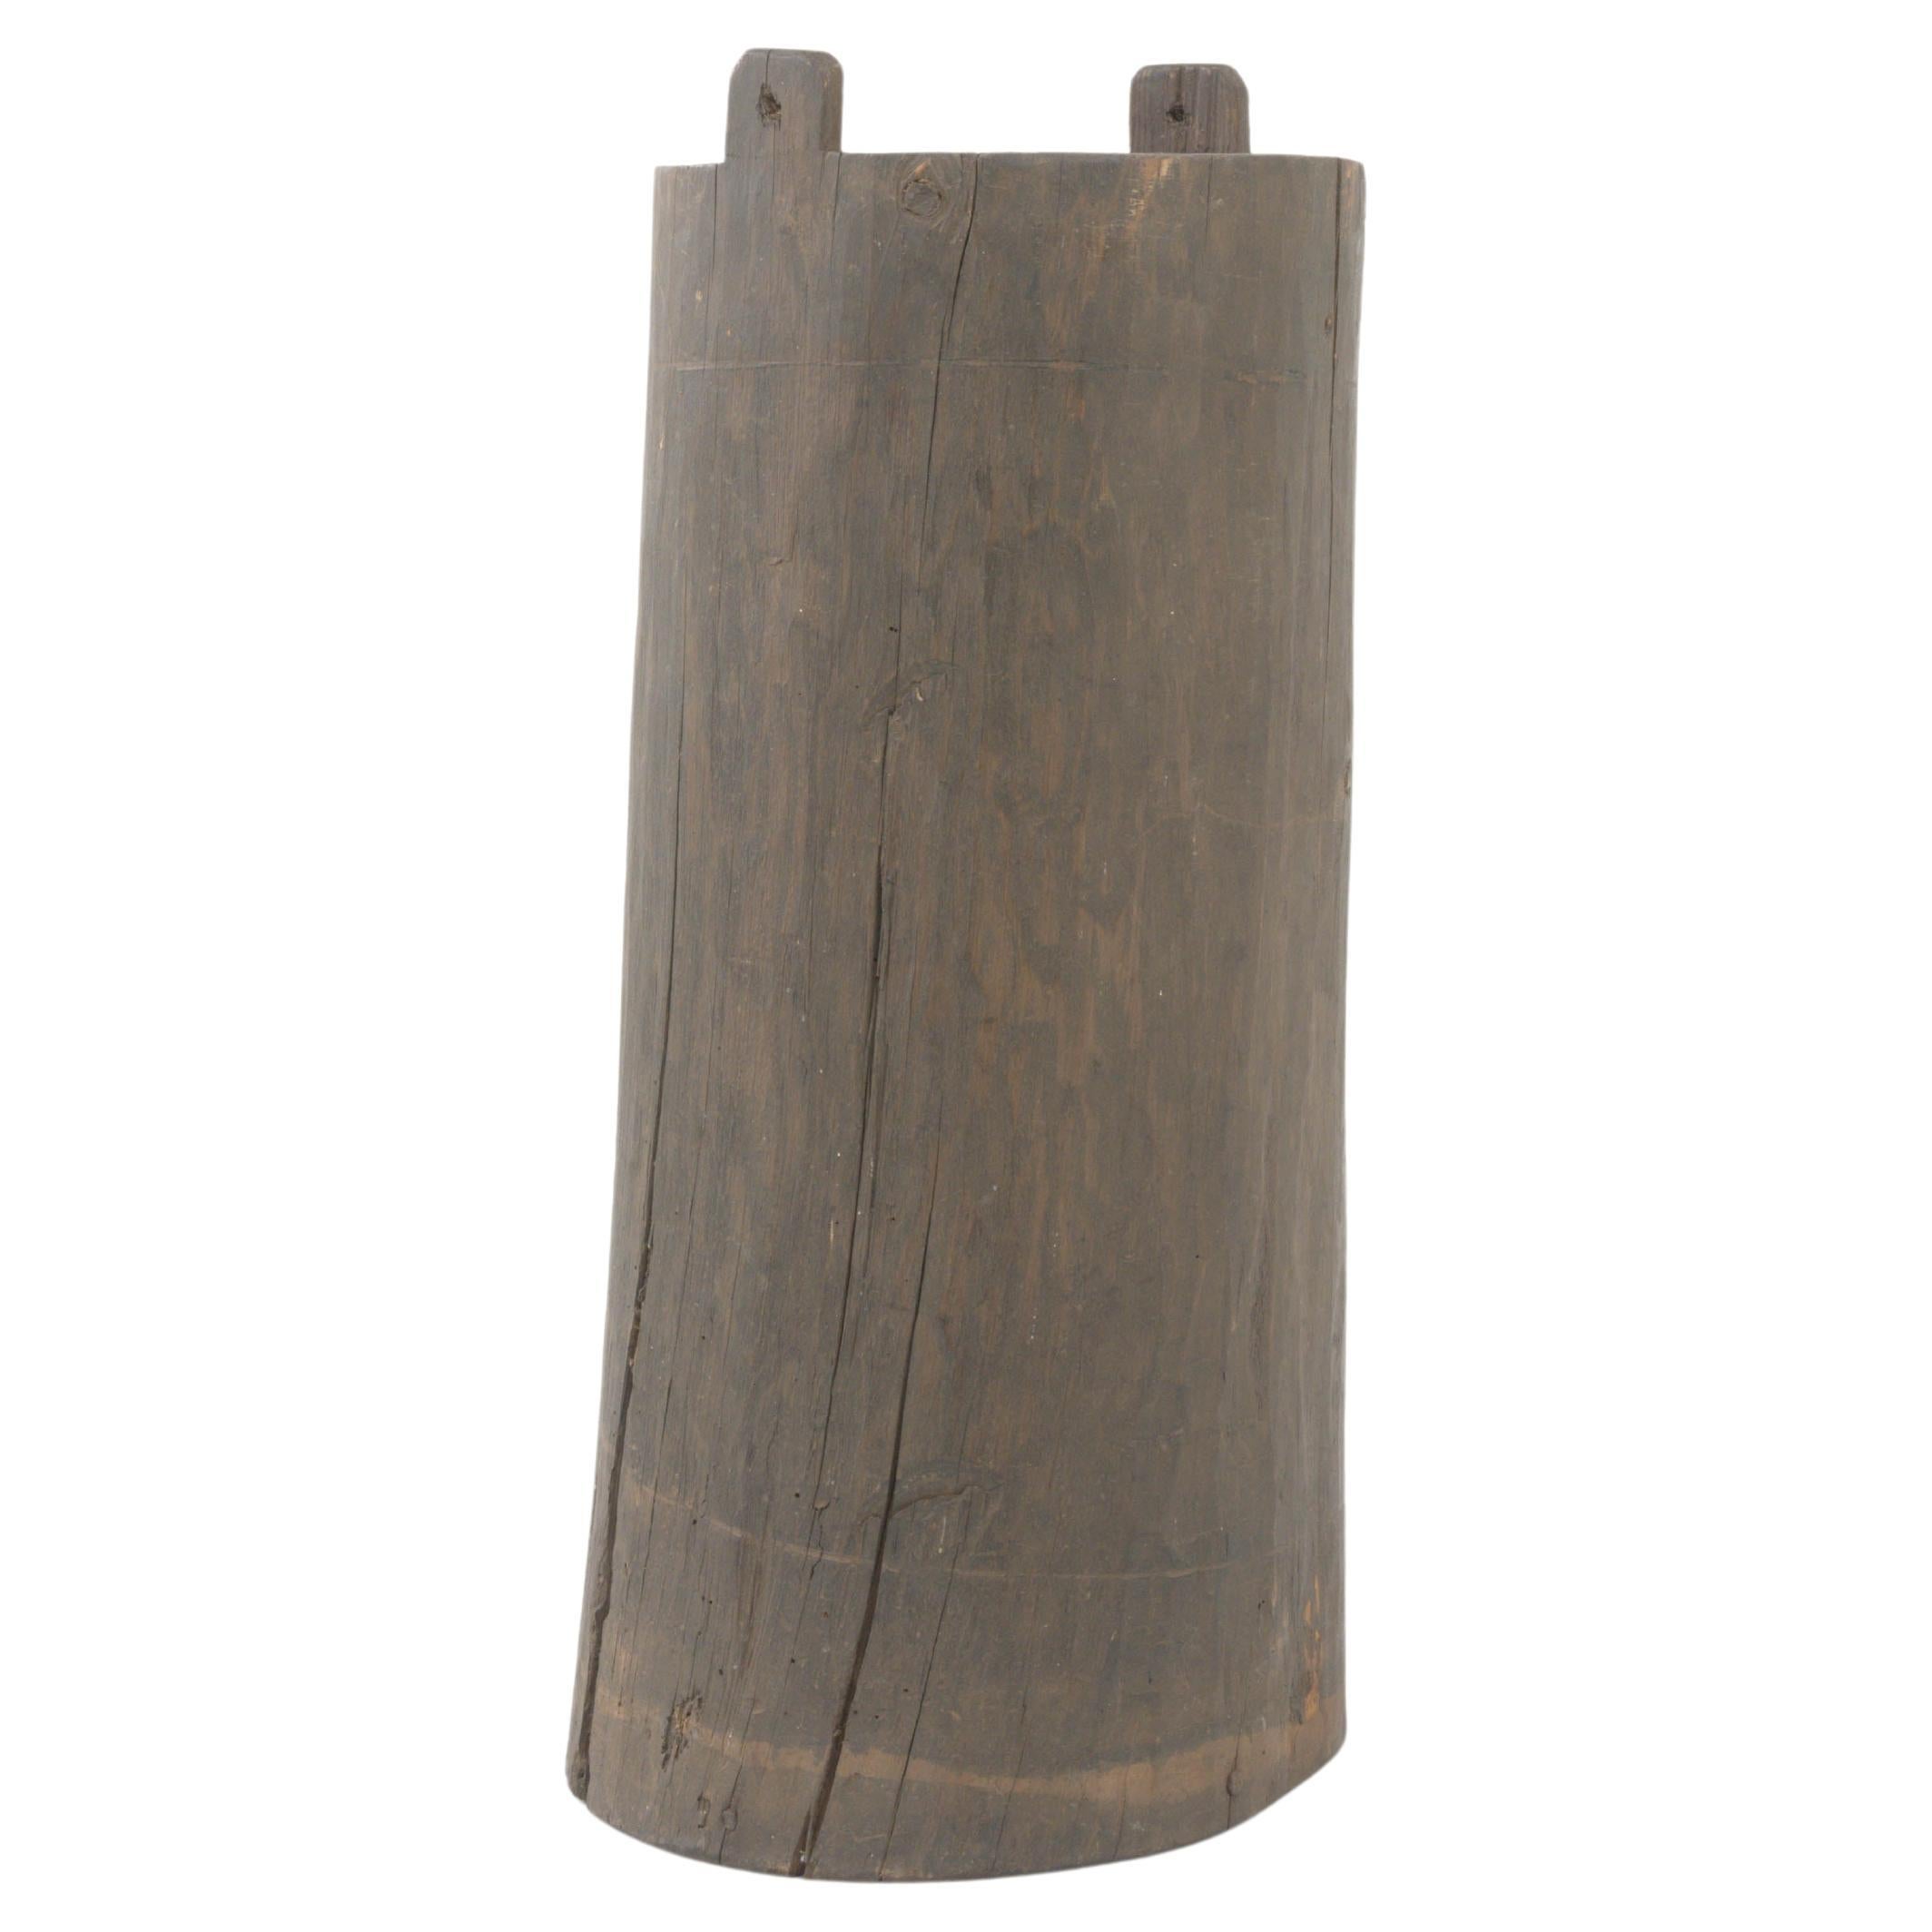 19th Century European Wooden Grain Container For Sale